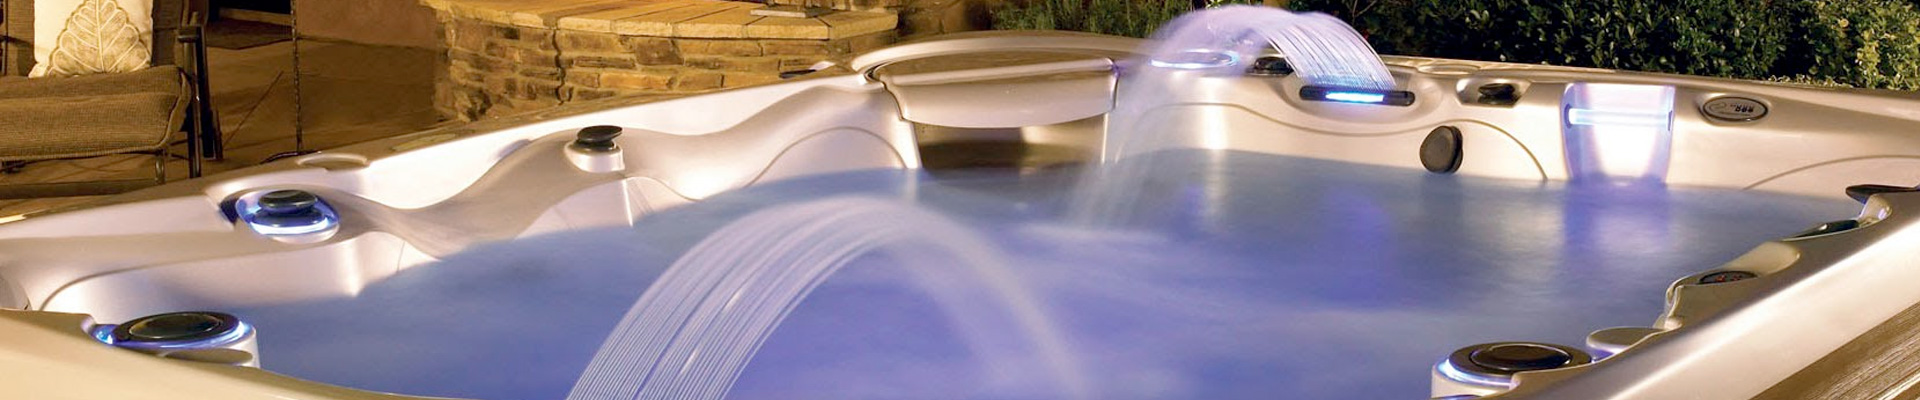 3 Reasons Why It’s a Great Time to Buy a New Hot Tub, Used Spas Lennox